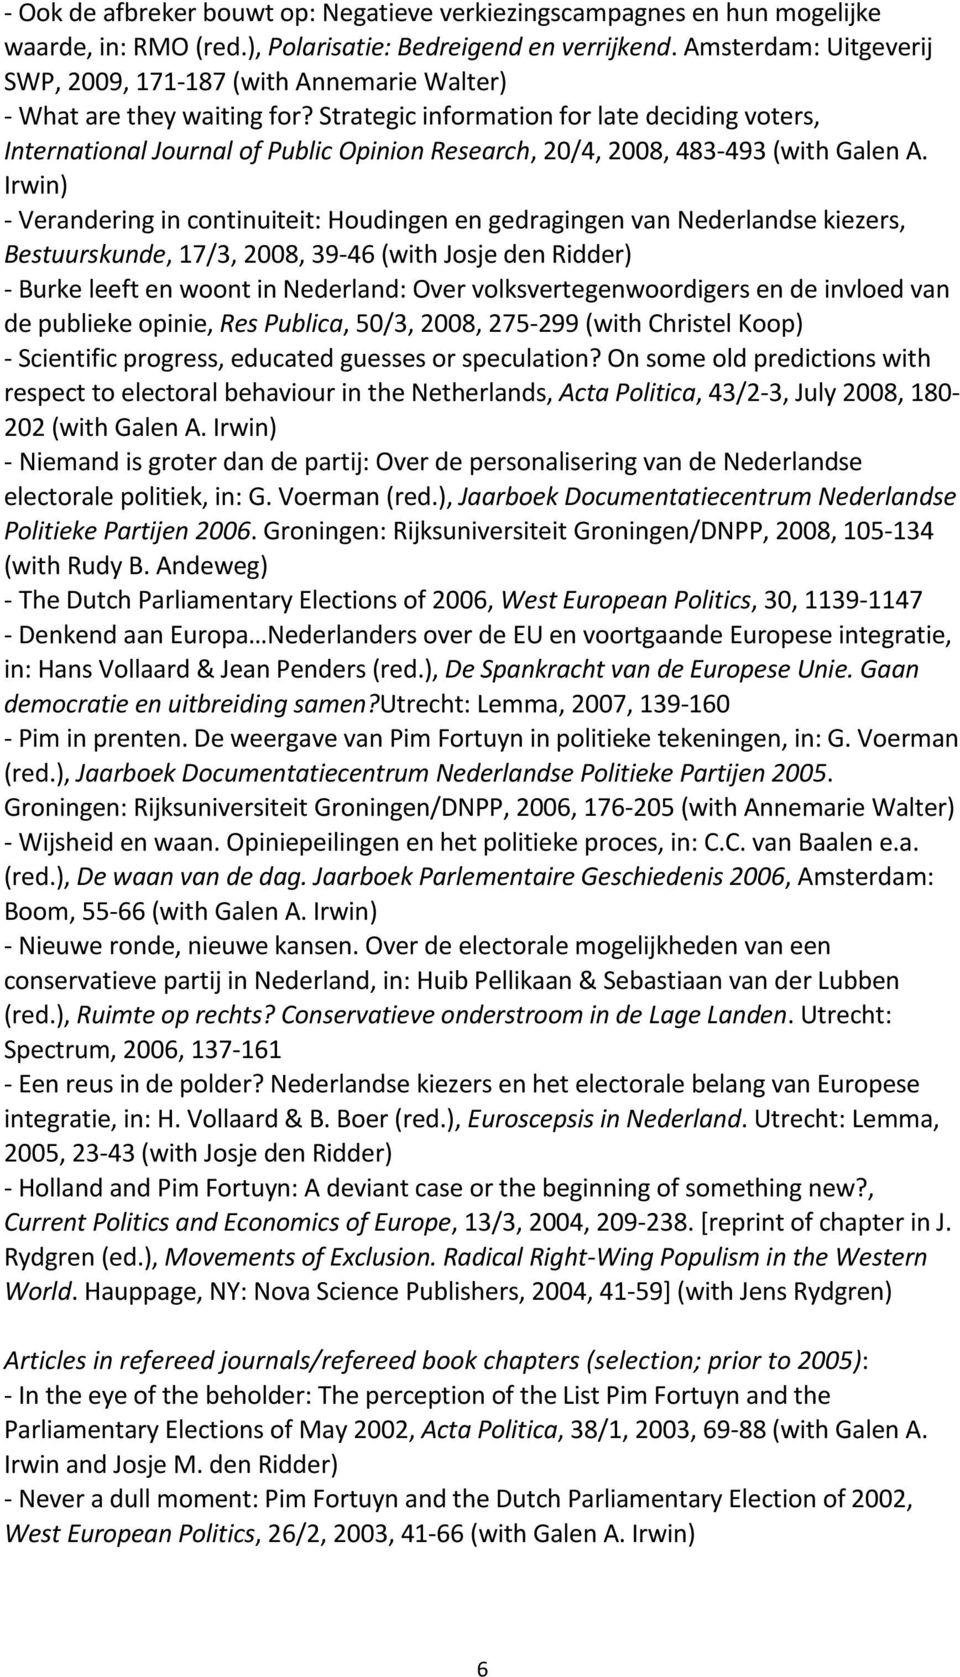 Strategic information for late deciding voters, International Journal of Public Opinion Research, 20/4, 2008, 483-493 (with Galen A.